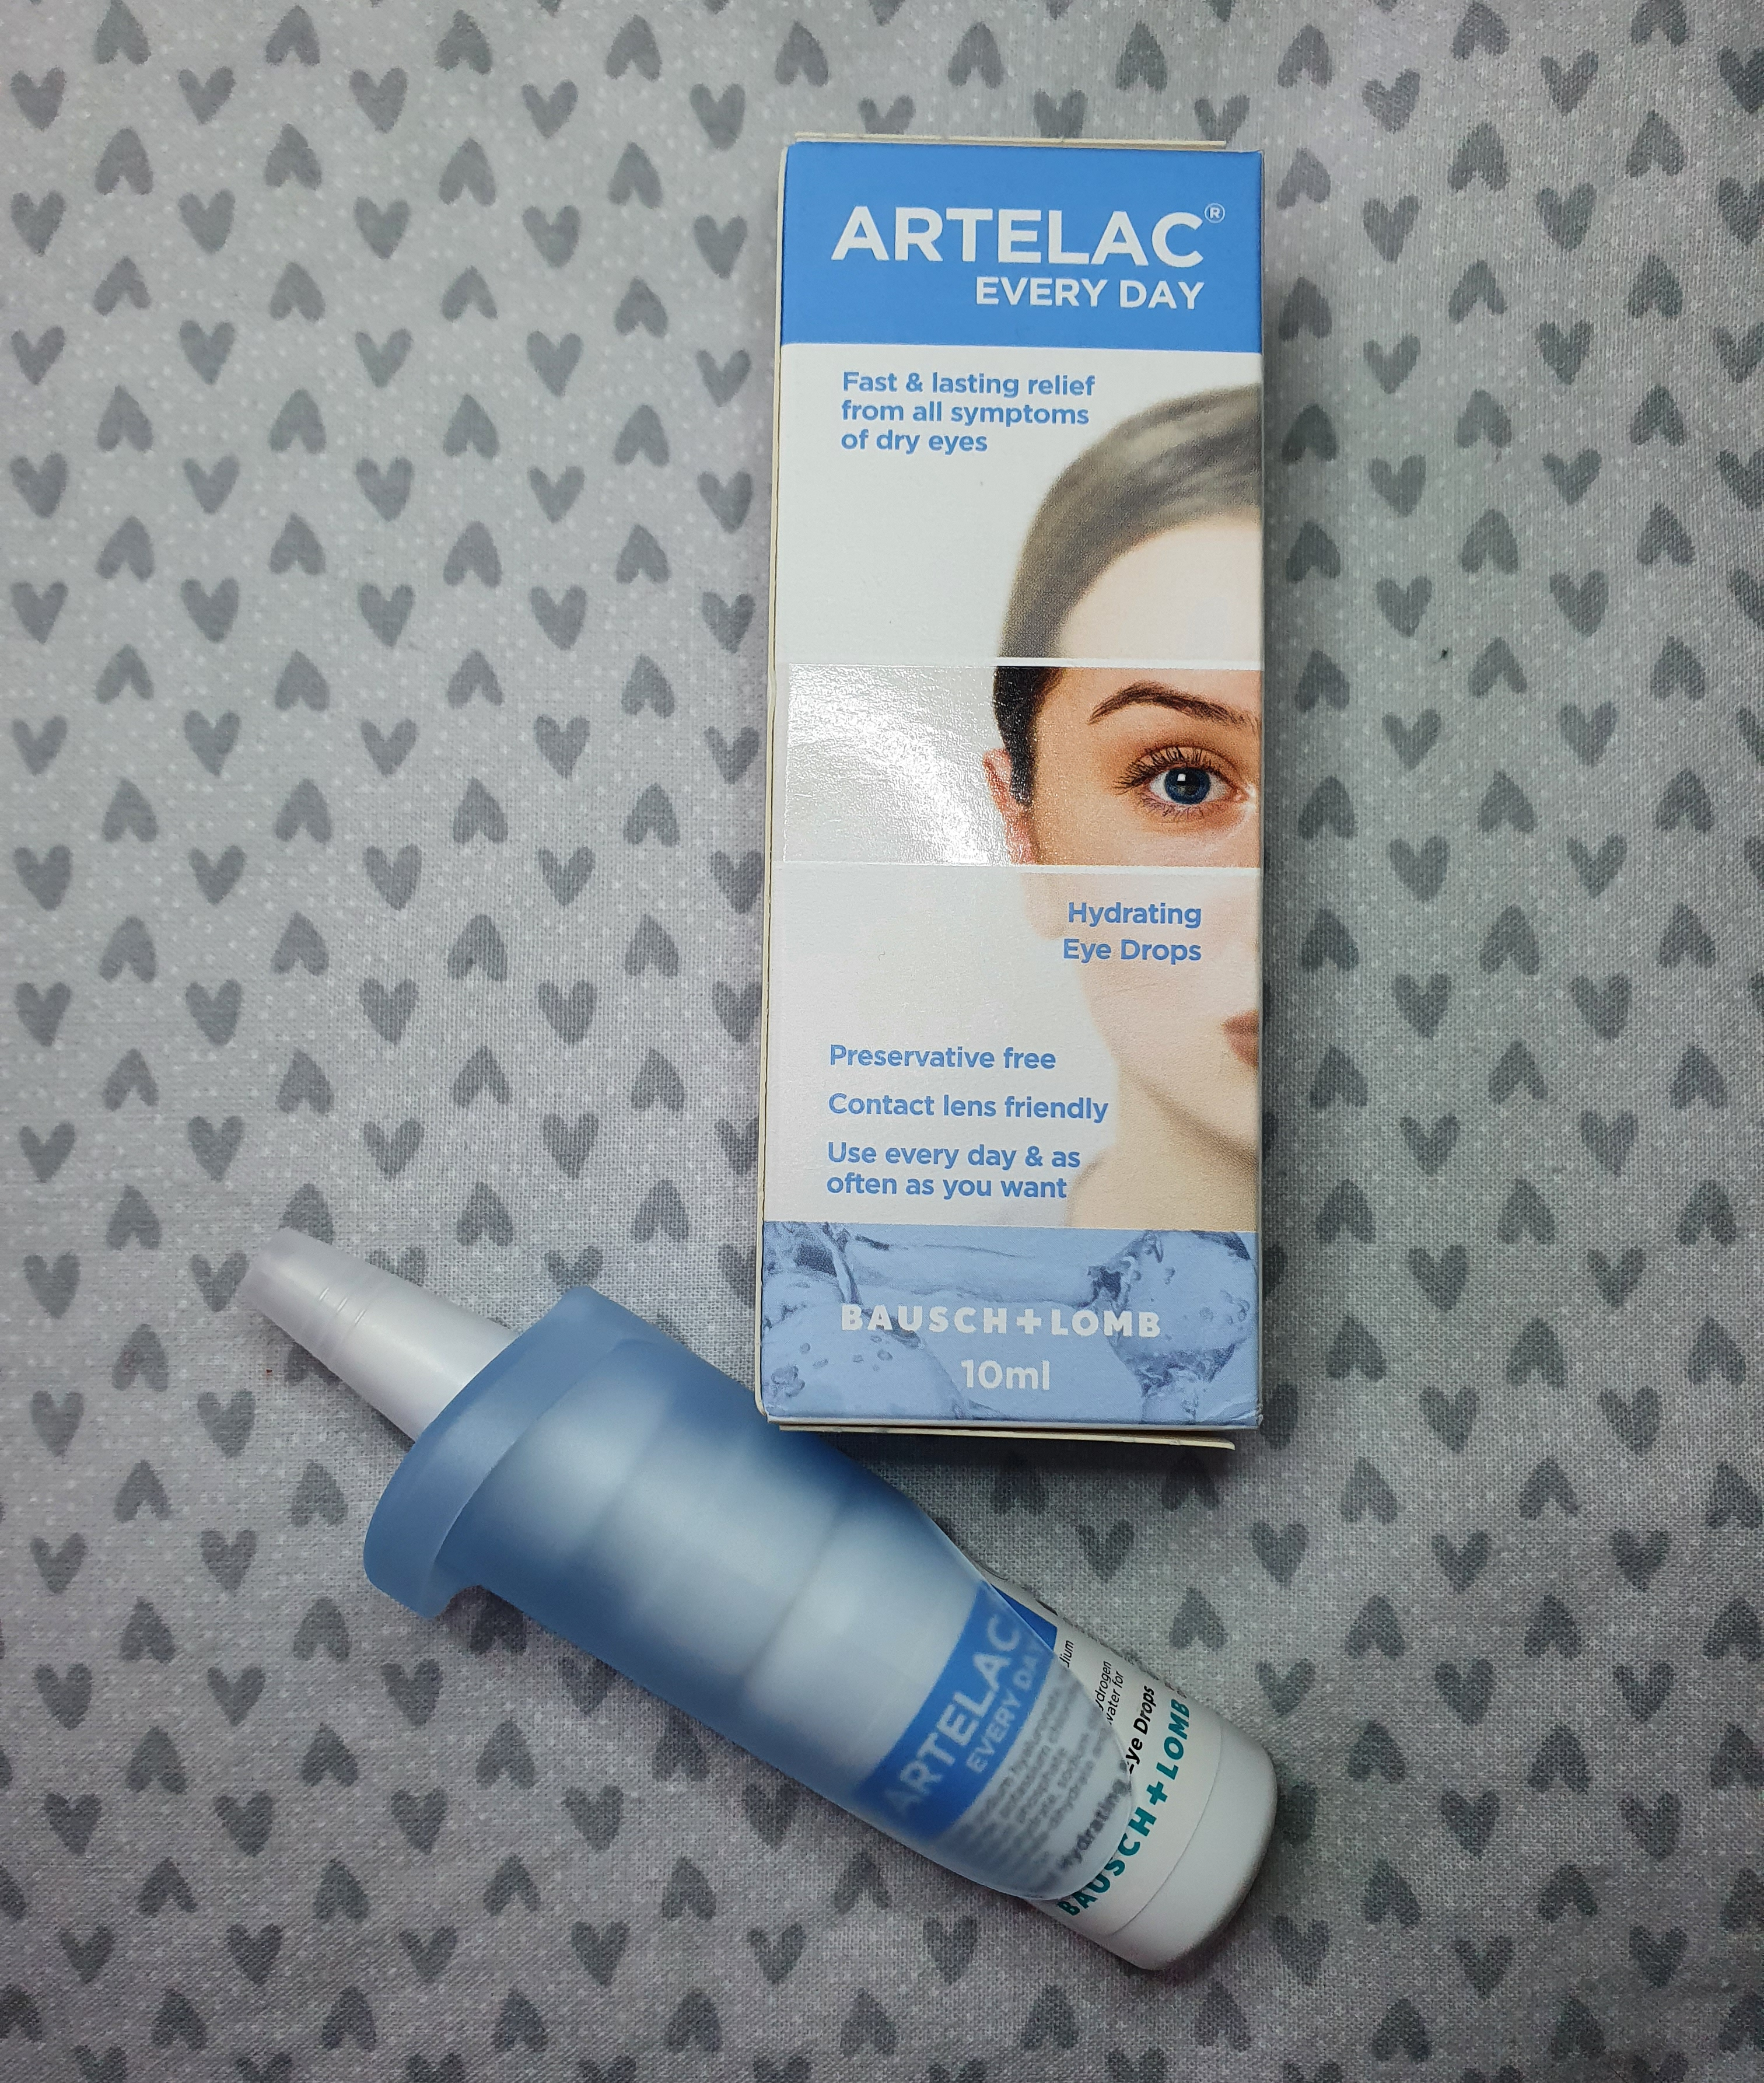 artelac-every-day-eye-drops-package-and-product